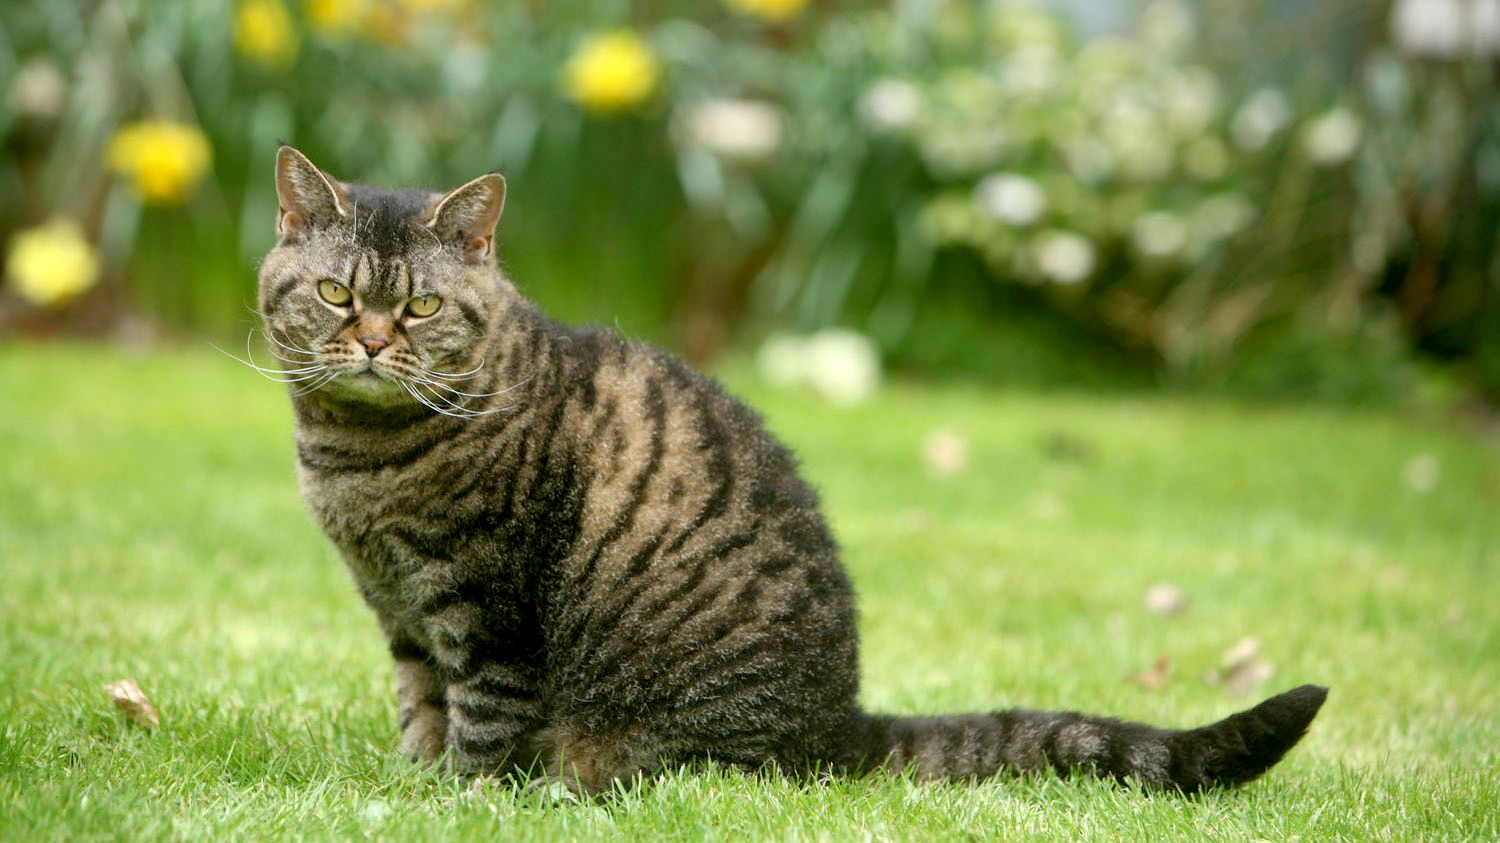 Tabby American Wirehair sat on the lawn in a garden